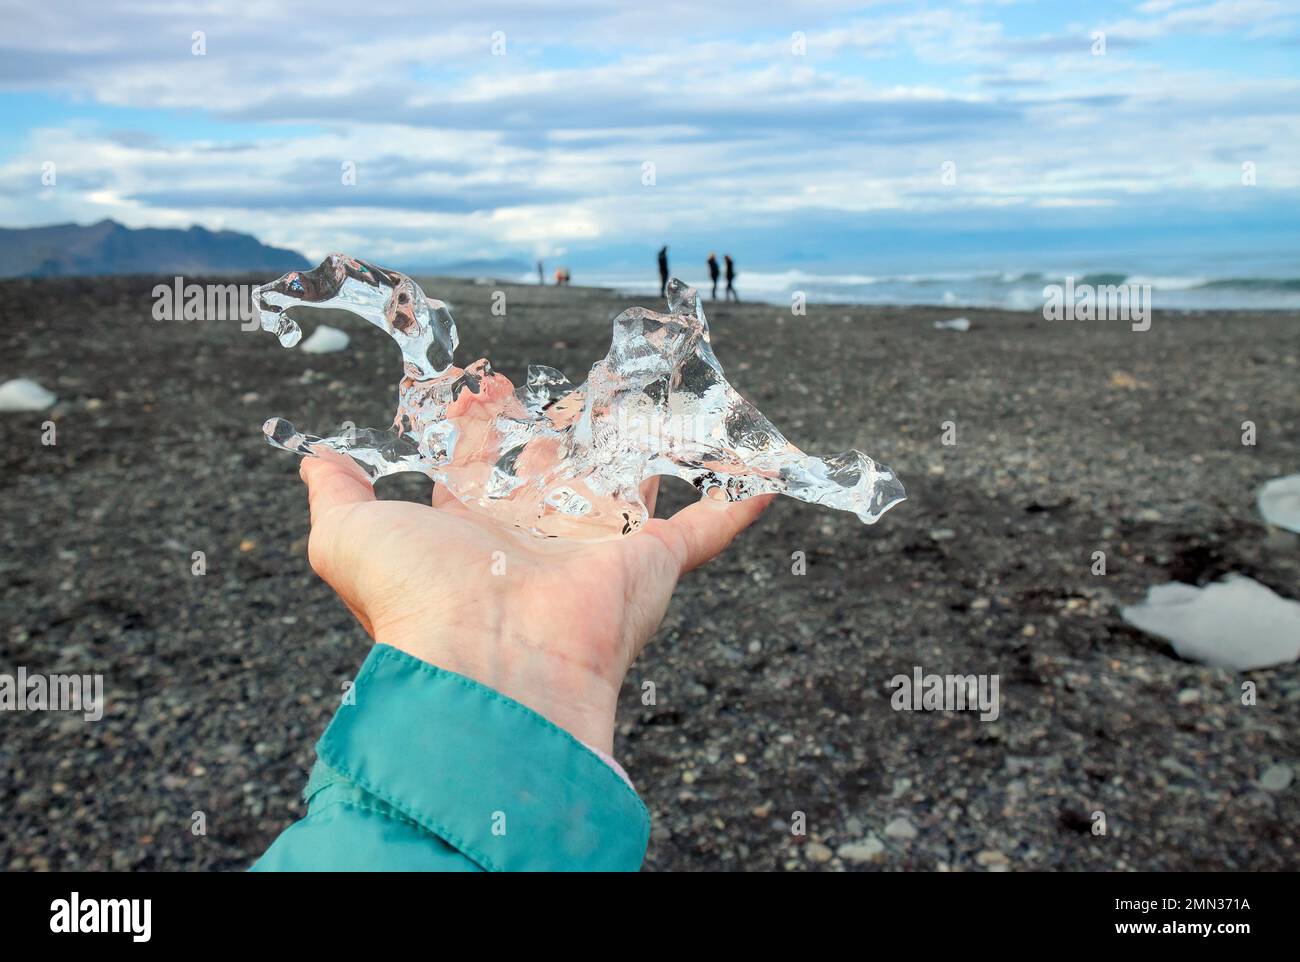 Close up view of woman tourist holding glacier ice on hand in Iceland place called Diamond beach in summer. Stock Photo